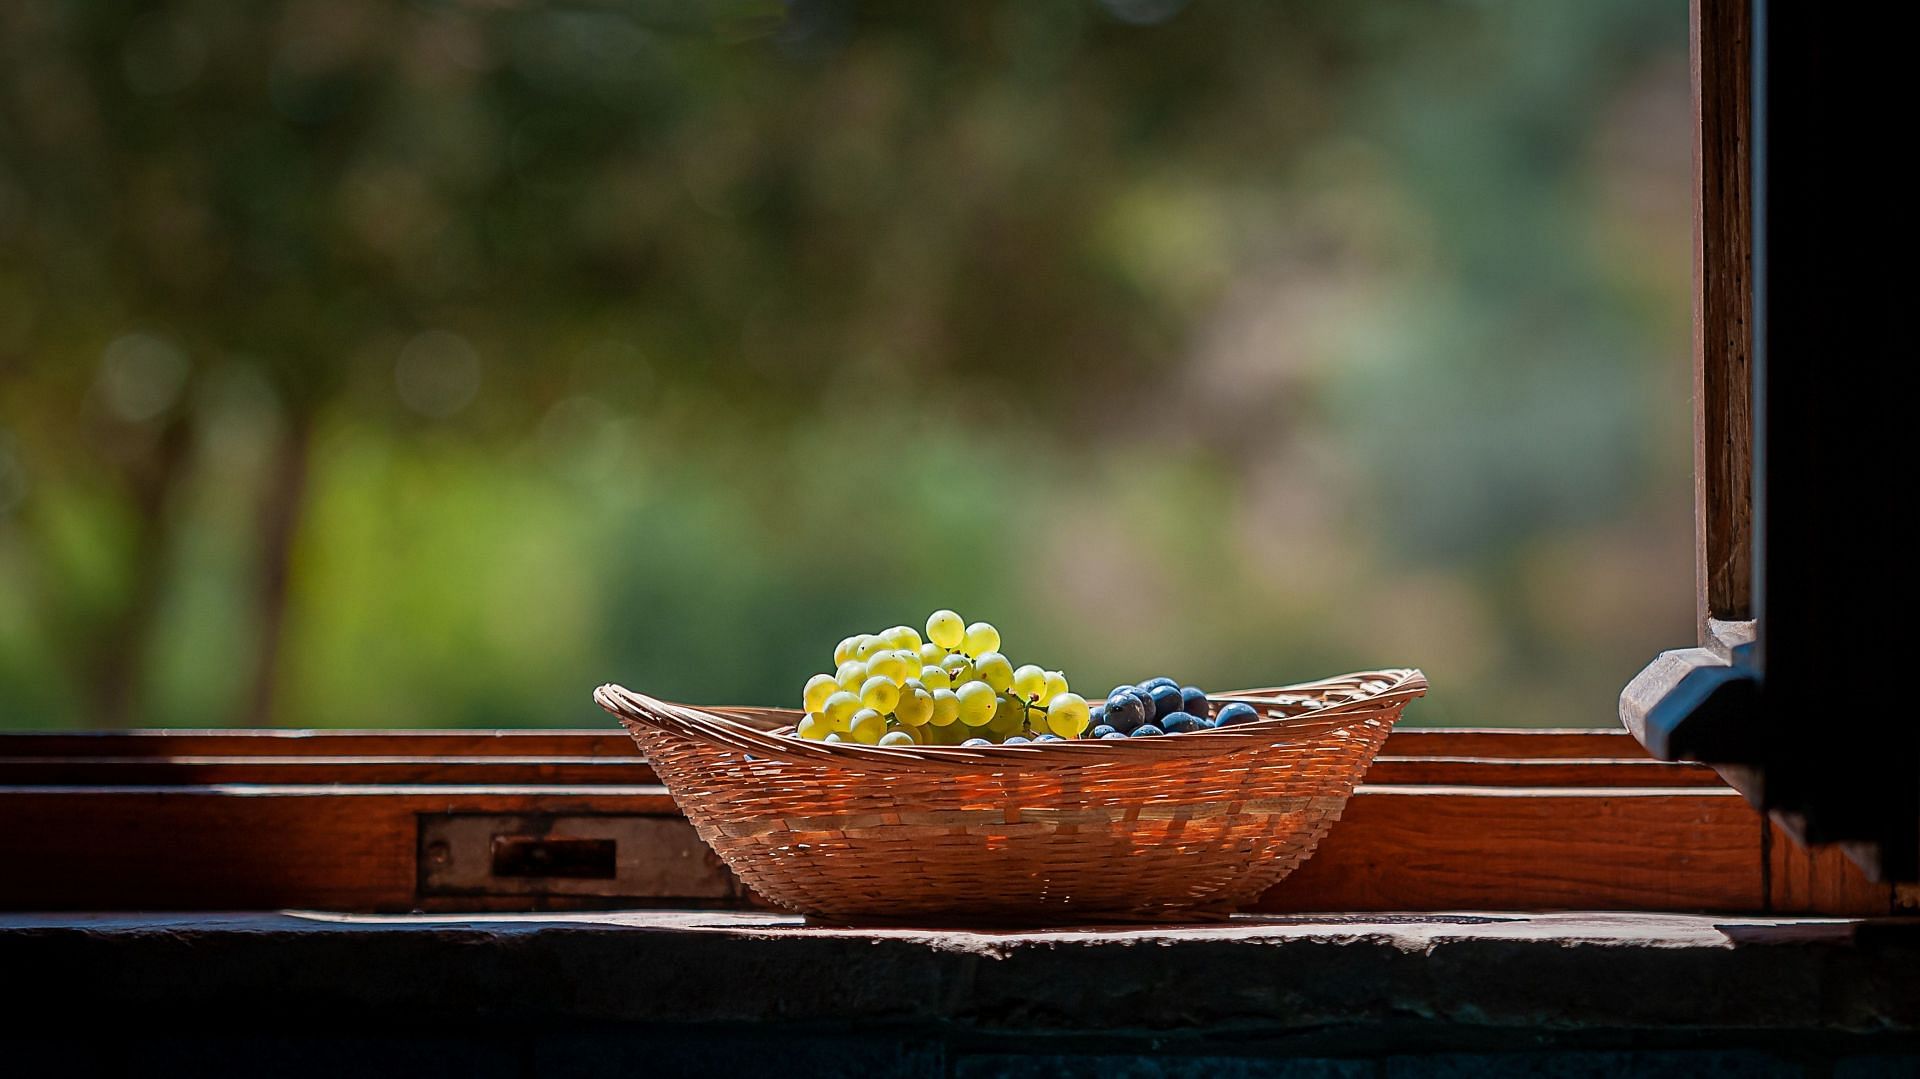 Grapes are a small, sweet fruit that grows in clusters. (Image Via Pexels)